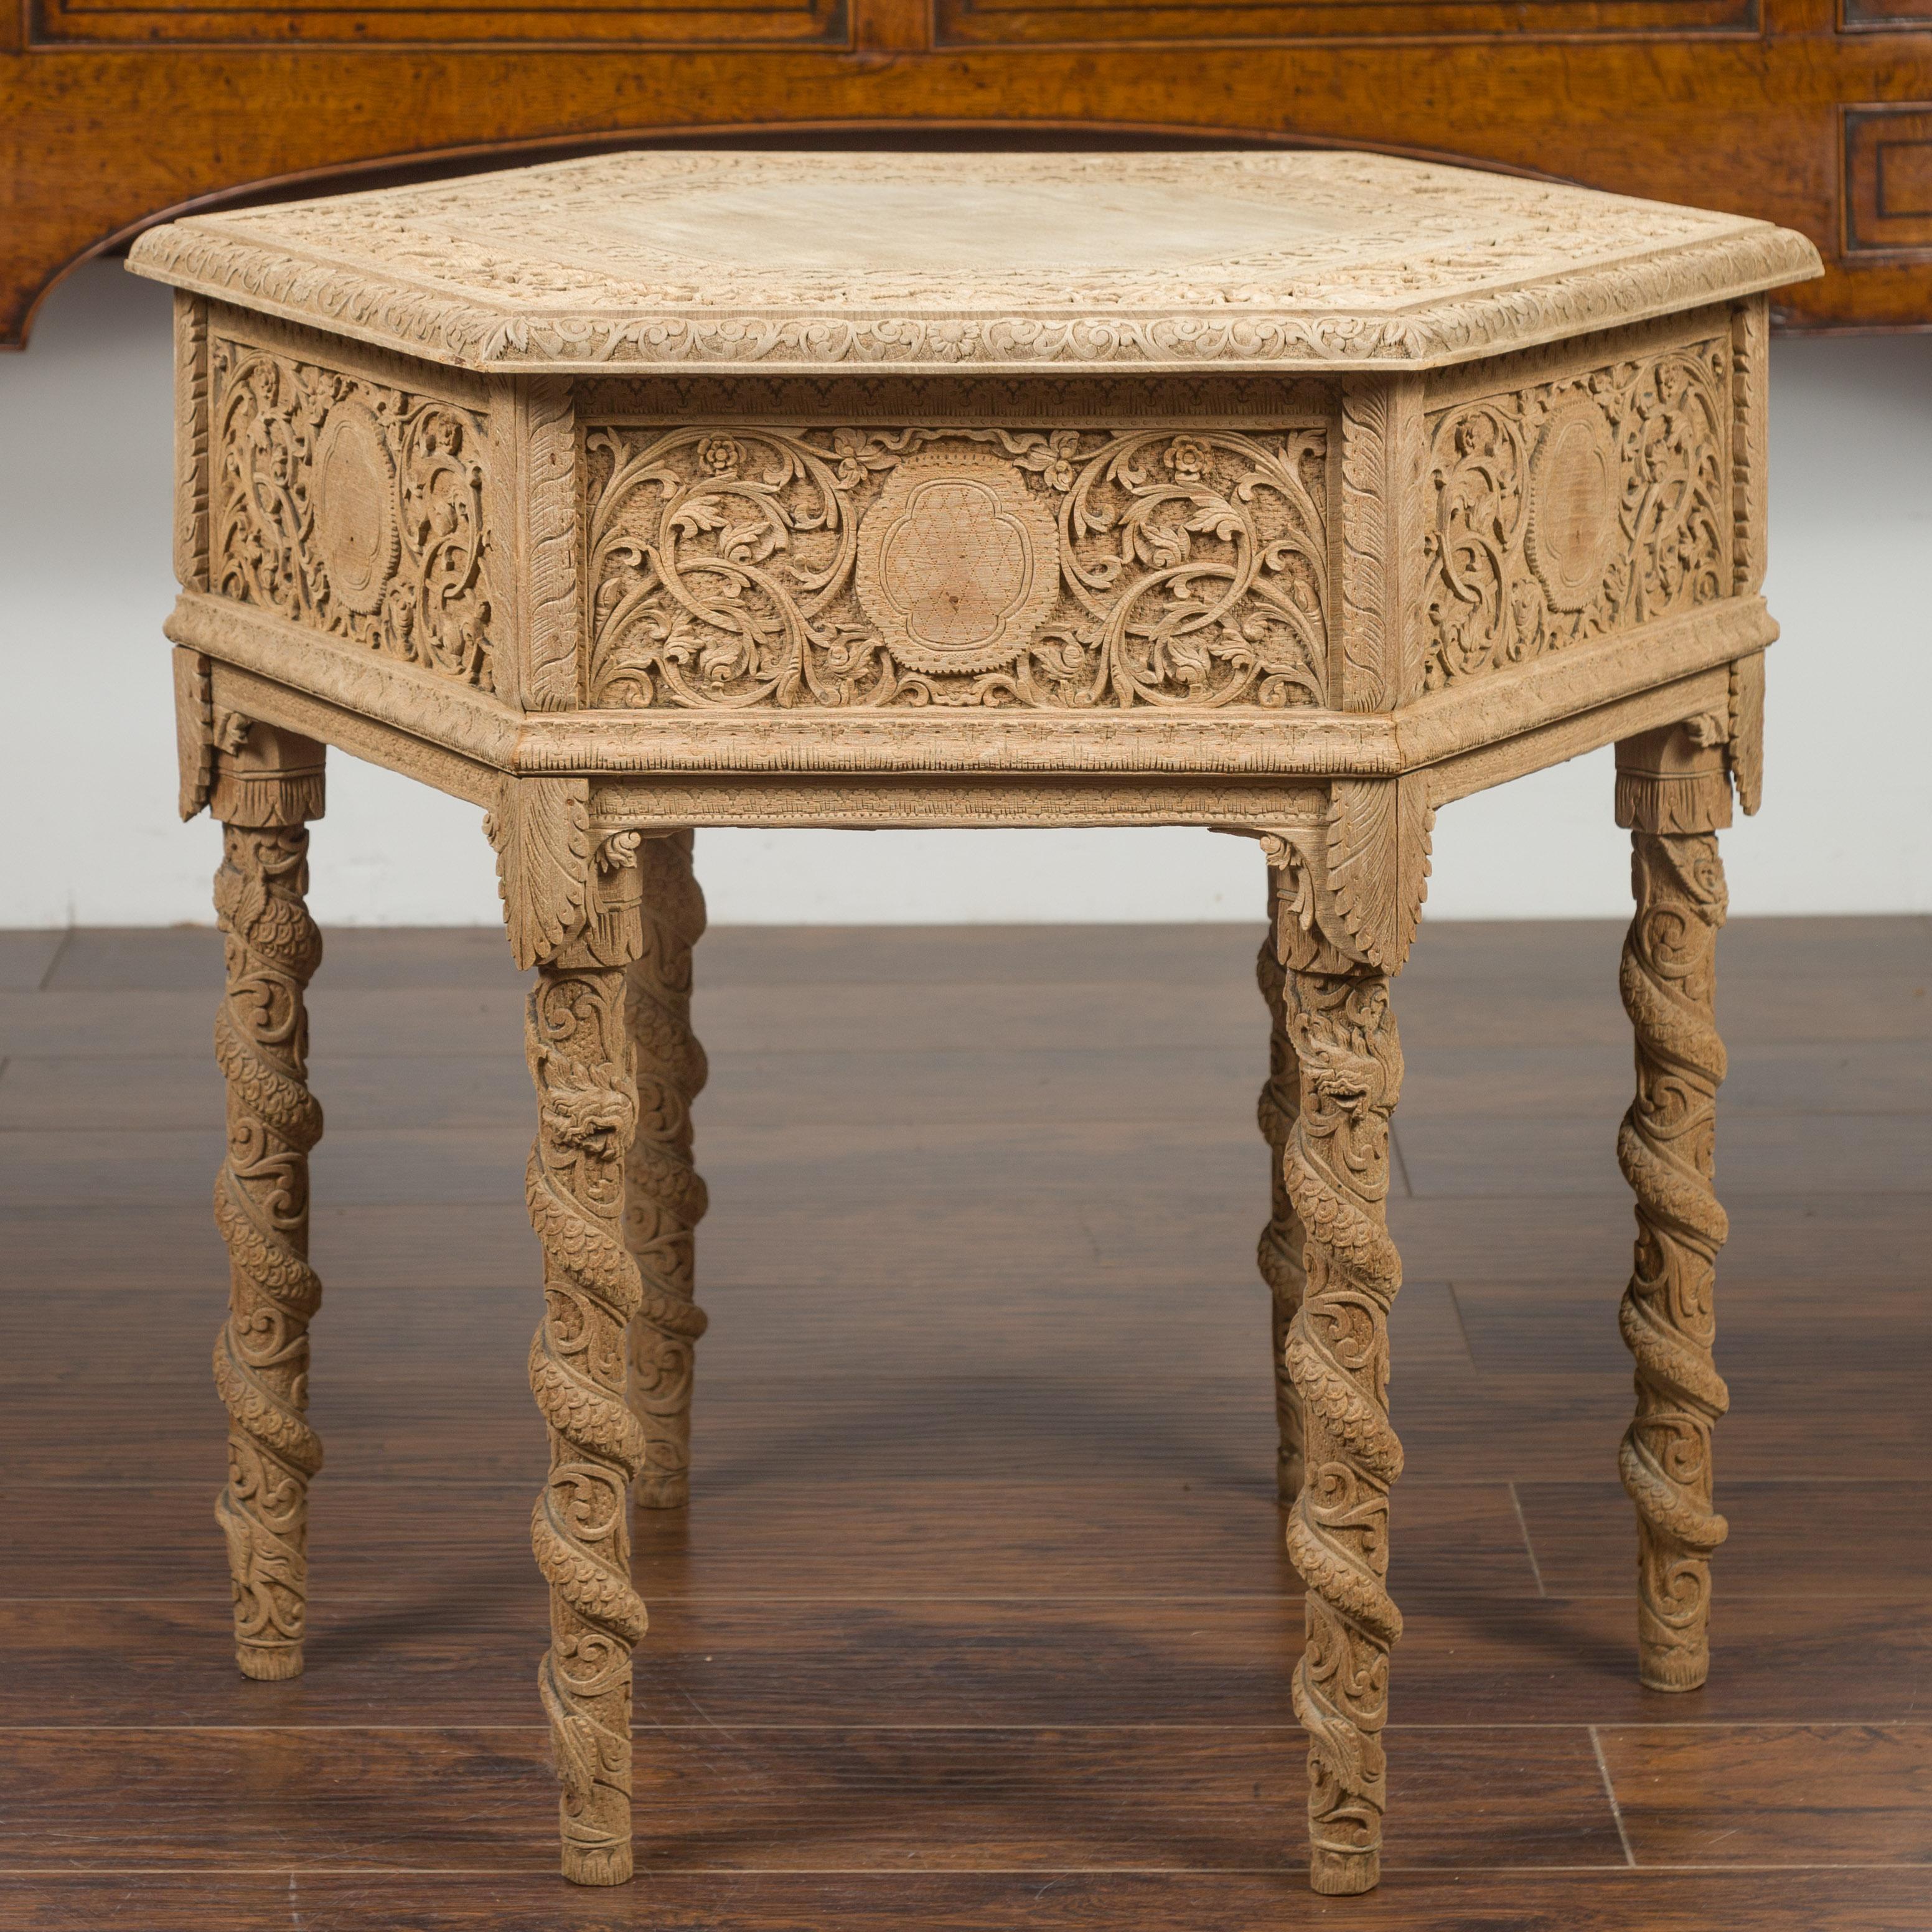 An Anglo-Indian bleached wood side table from the early 20th century, with hexagonal top and carved rinceaux. Created in India during the first quarter of the 20th century, this bleached wood side table features an hexagonal top adorned with